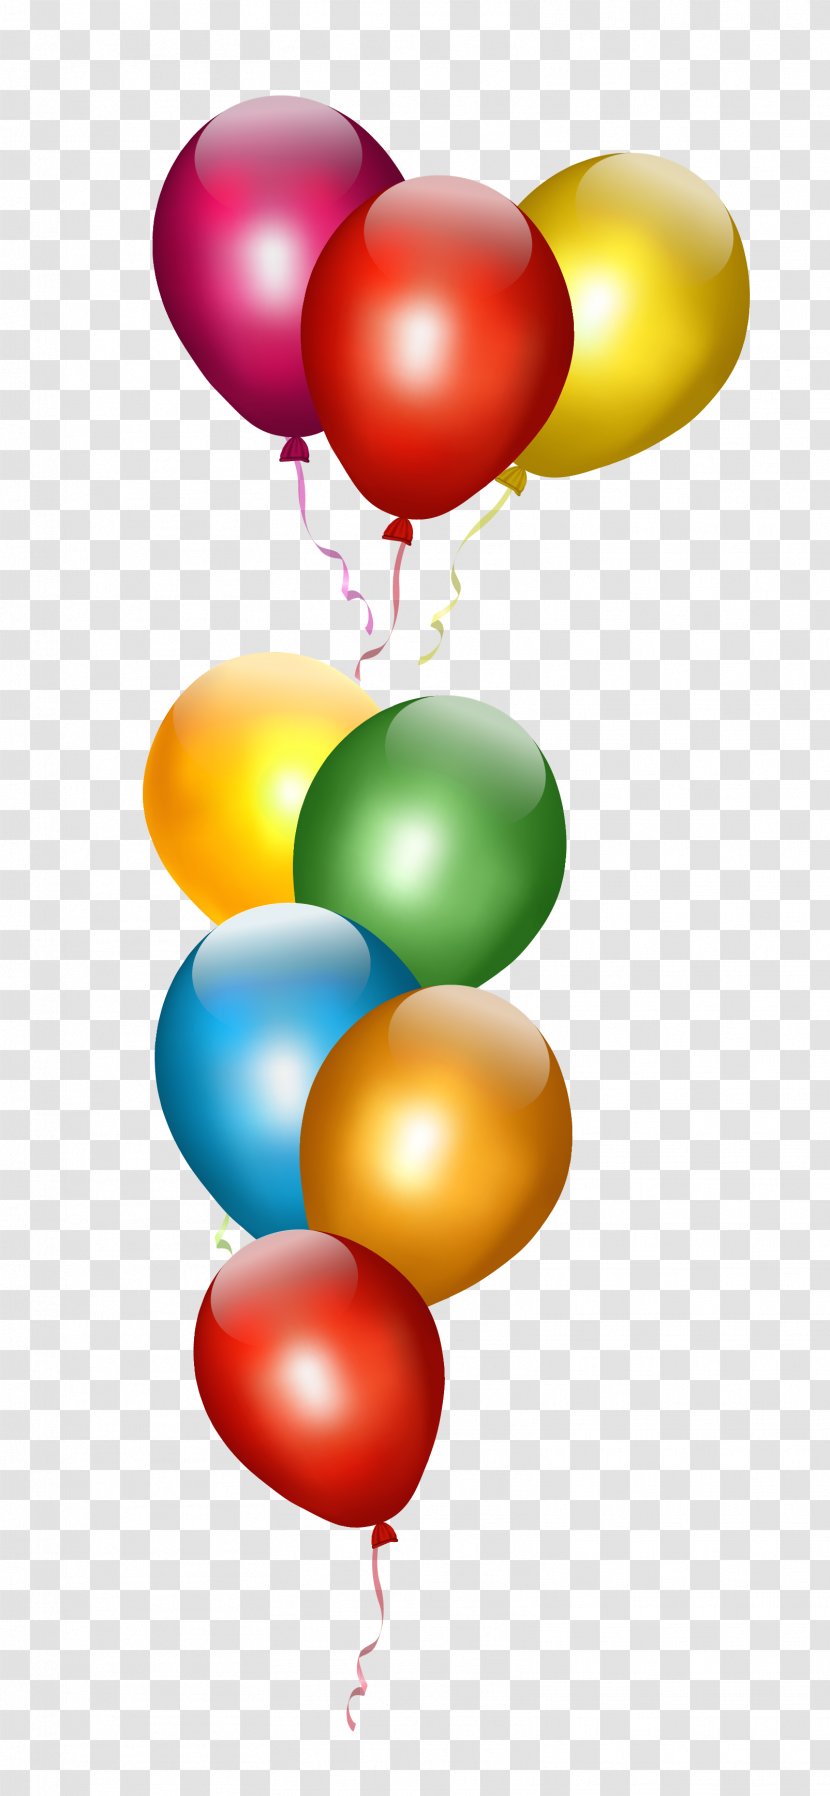 Party Toy Balloon Birthday Gift - Wedding - Transparent Balloons Transparent PNG